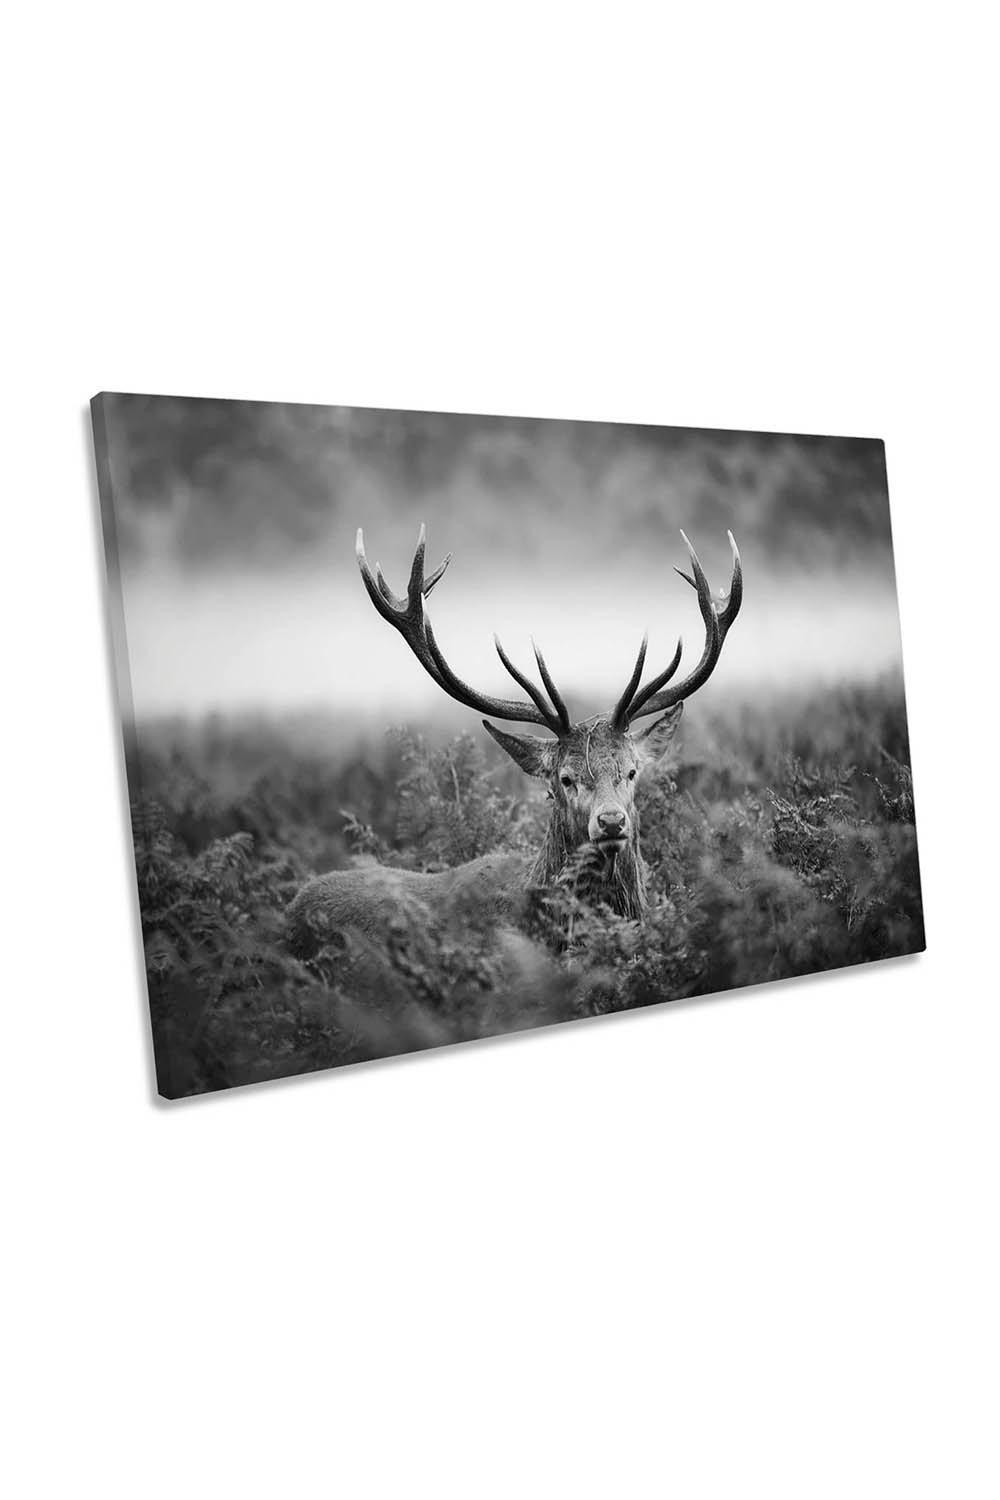 Wild Stag Antlers Black and White Deer Canvas Wall Art Picture Print